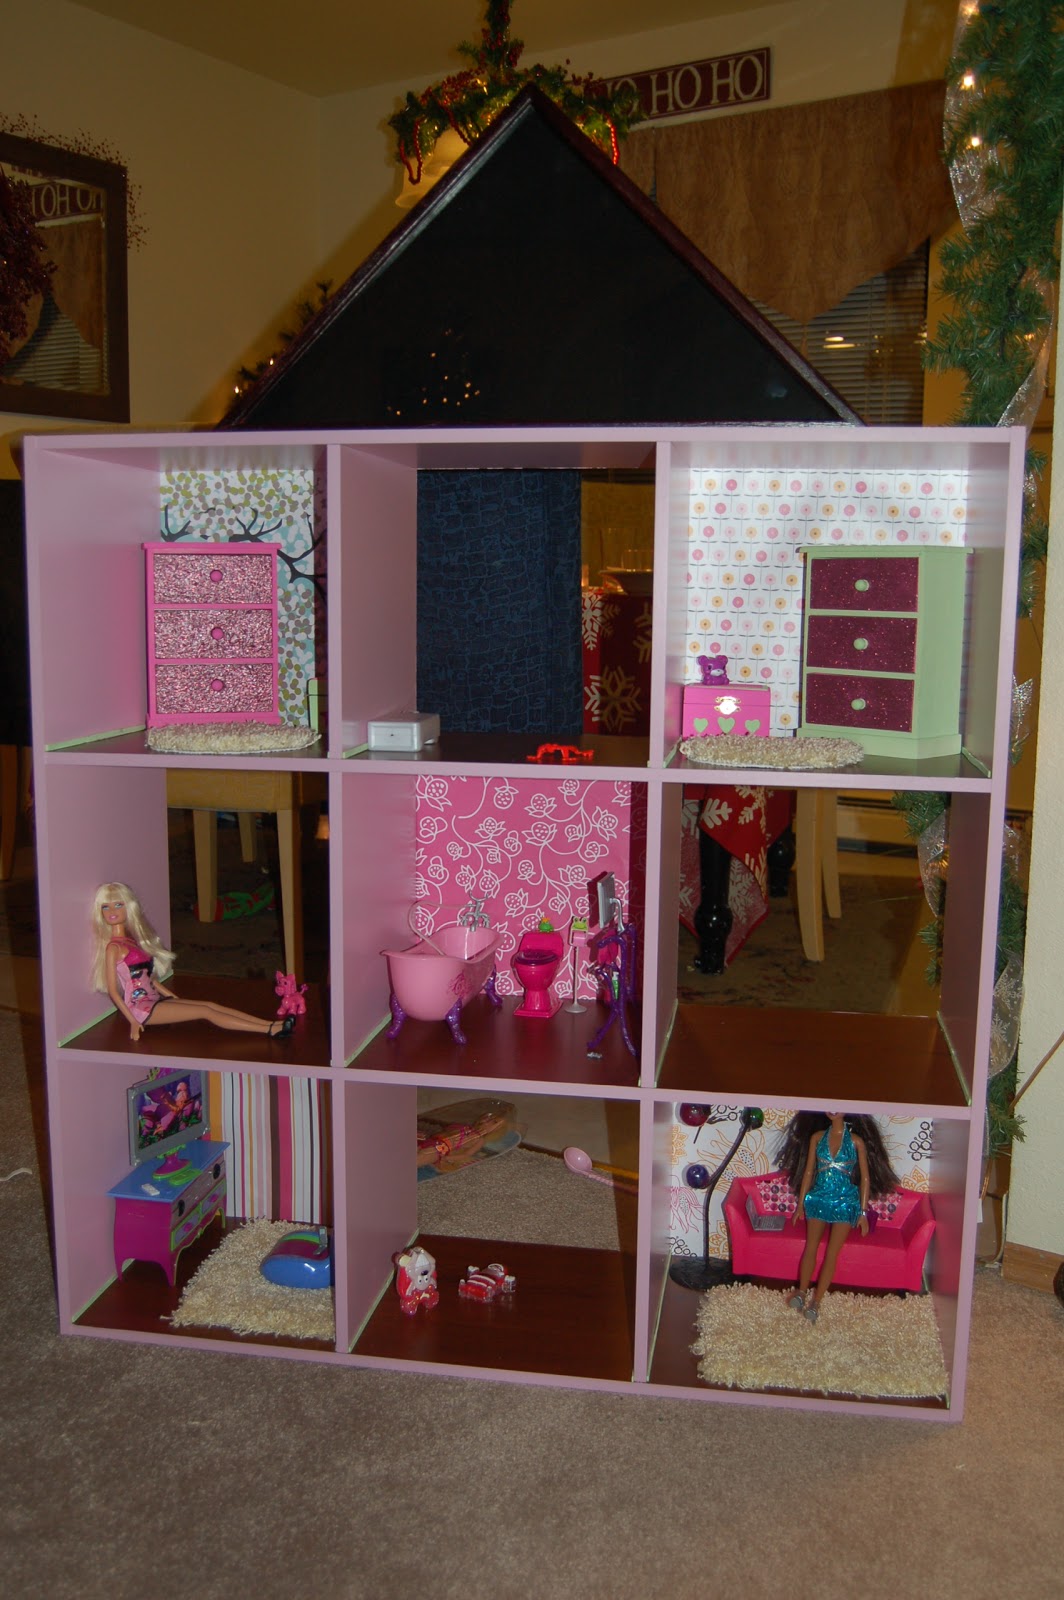 annette's notes: How to make a Barbie dream house